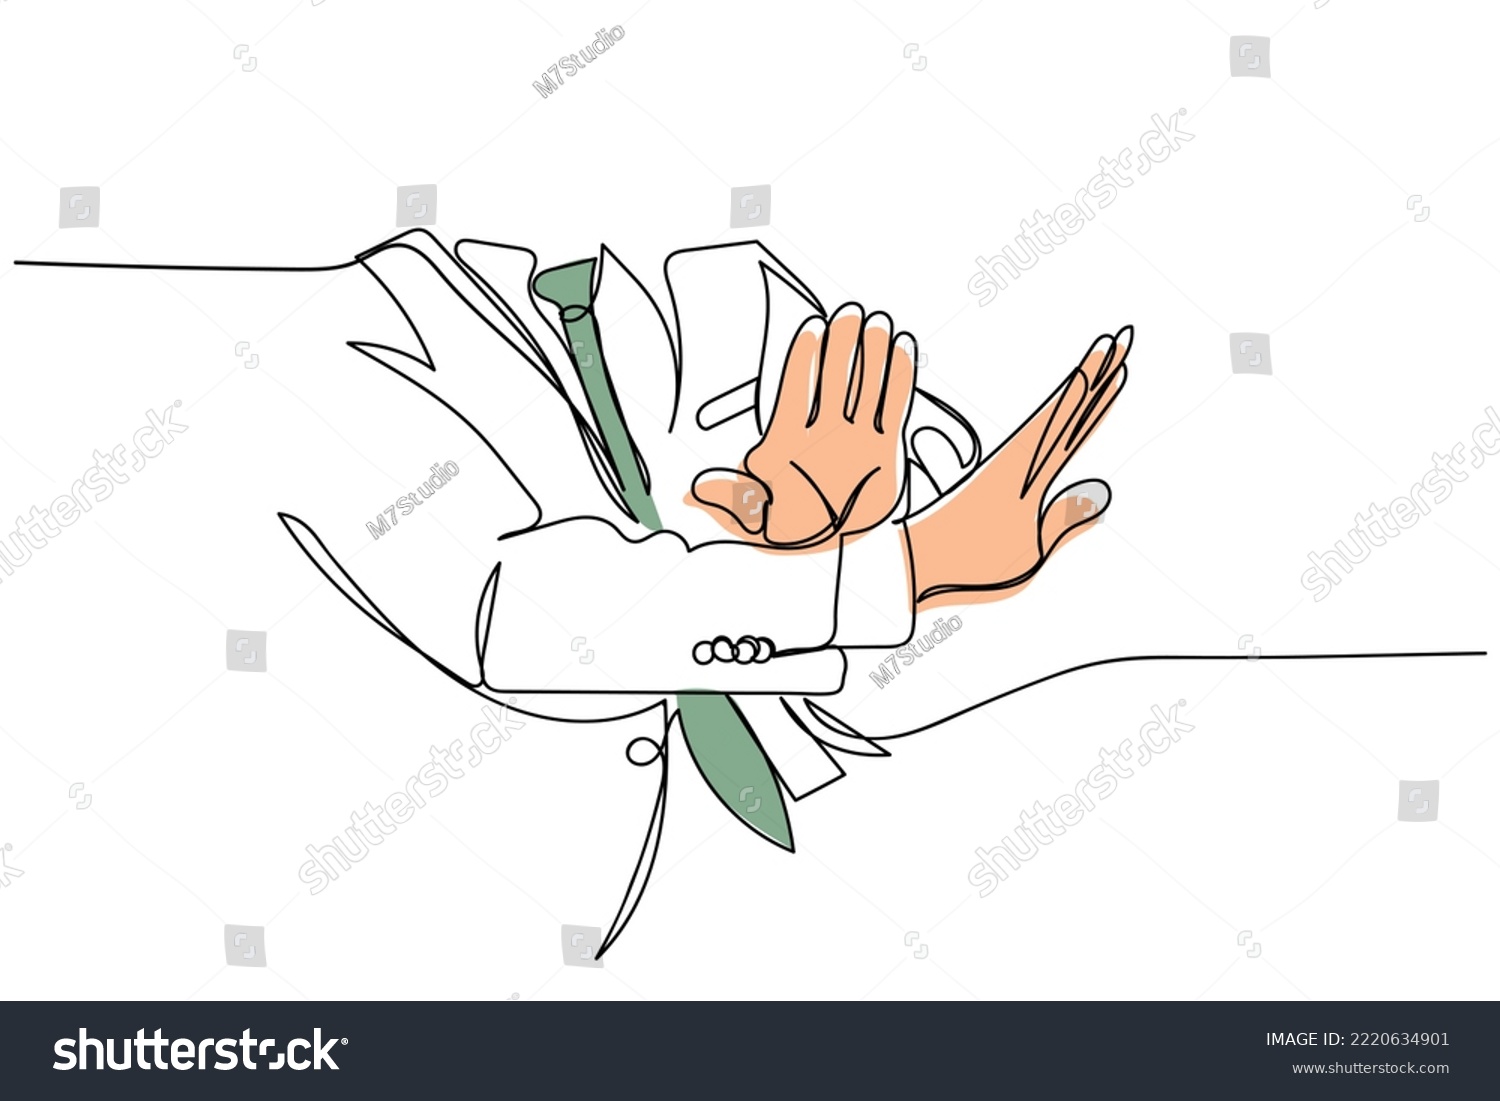 SVG of Continuous line art of a person with hand gestures indicating dispute. Unacceptable. Stand against injustice. Bribery in corporate setting. Honest official. Deny illegal demands concept art. Hands. svg